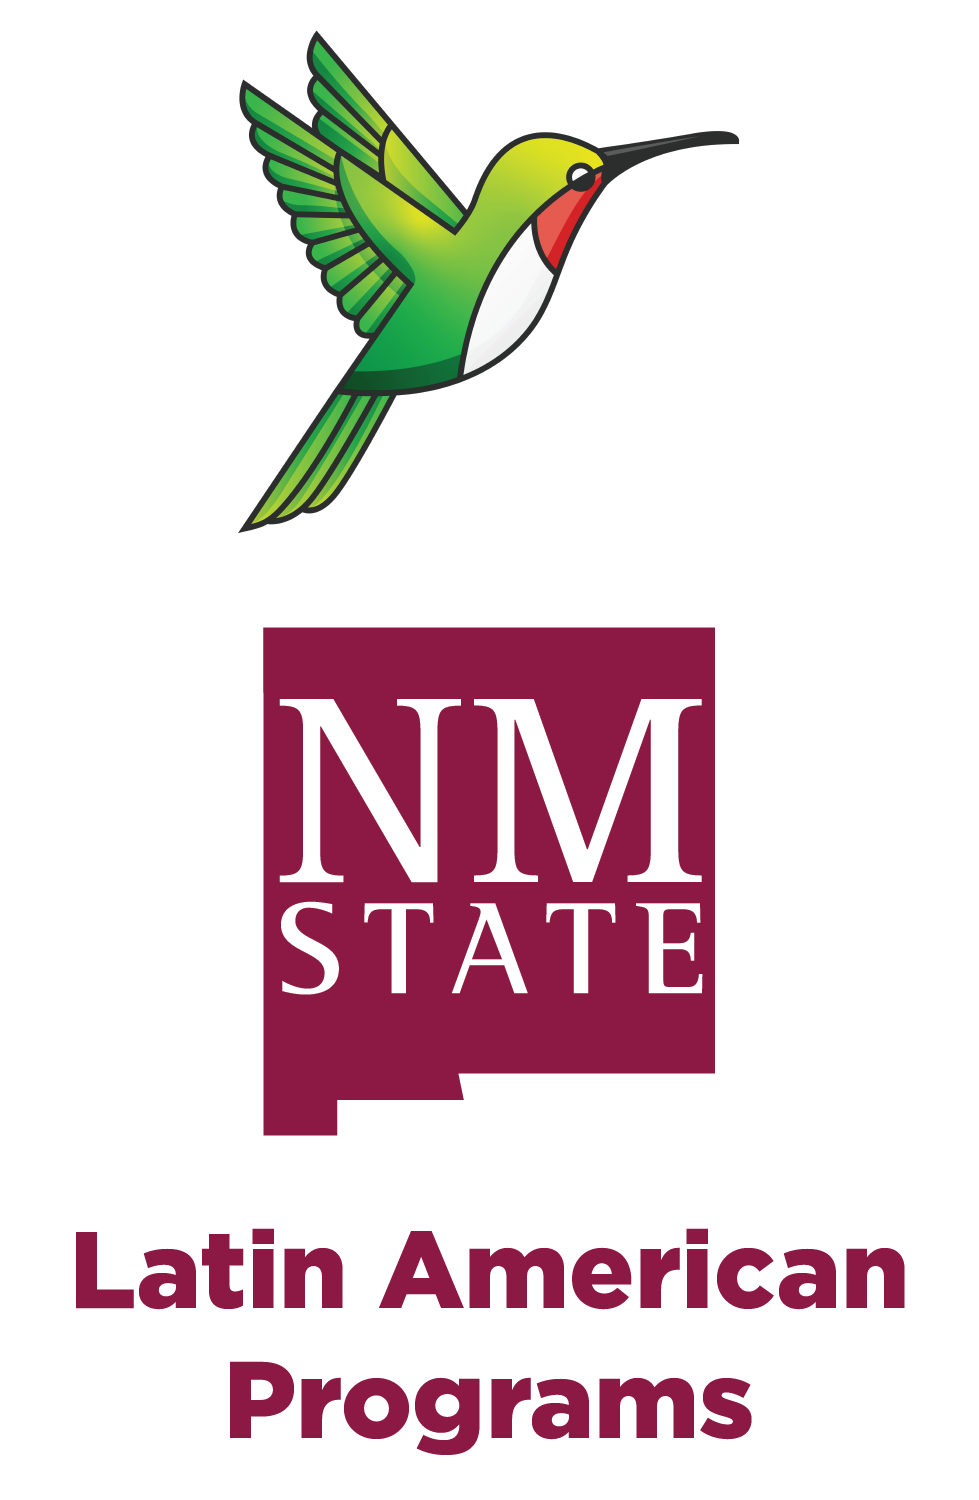 The image features a stylized representation of a green hummingbird flying, positioned at the top center. Below the hummingbird is a maroon-colored rectangular emblem with the white text "NM STATE" inside. Directly beneath the emblem, the words "Latin American Programs" are written in maroon-colored text. The background is white.